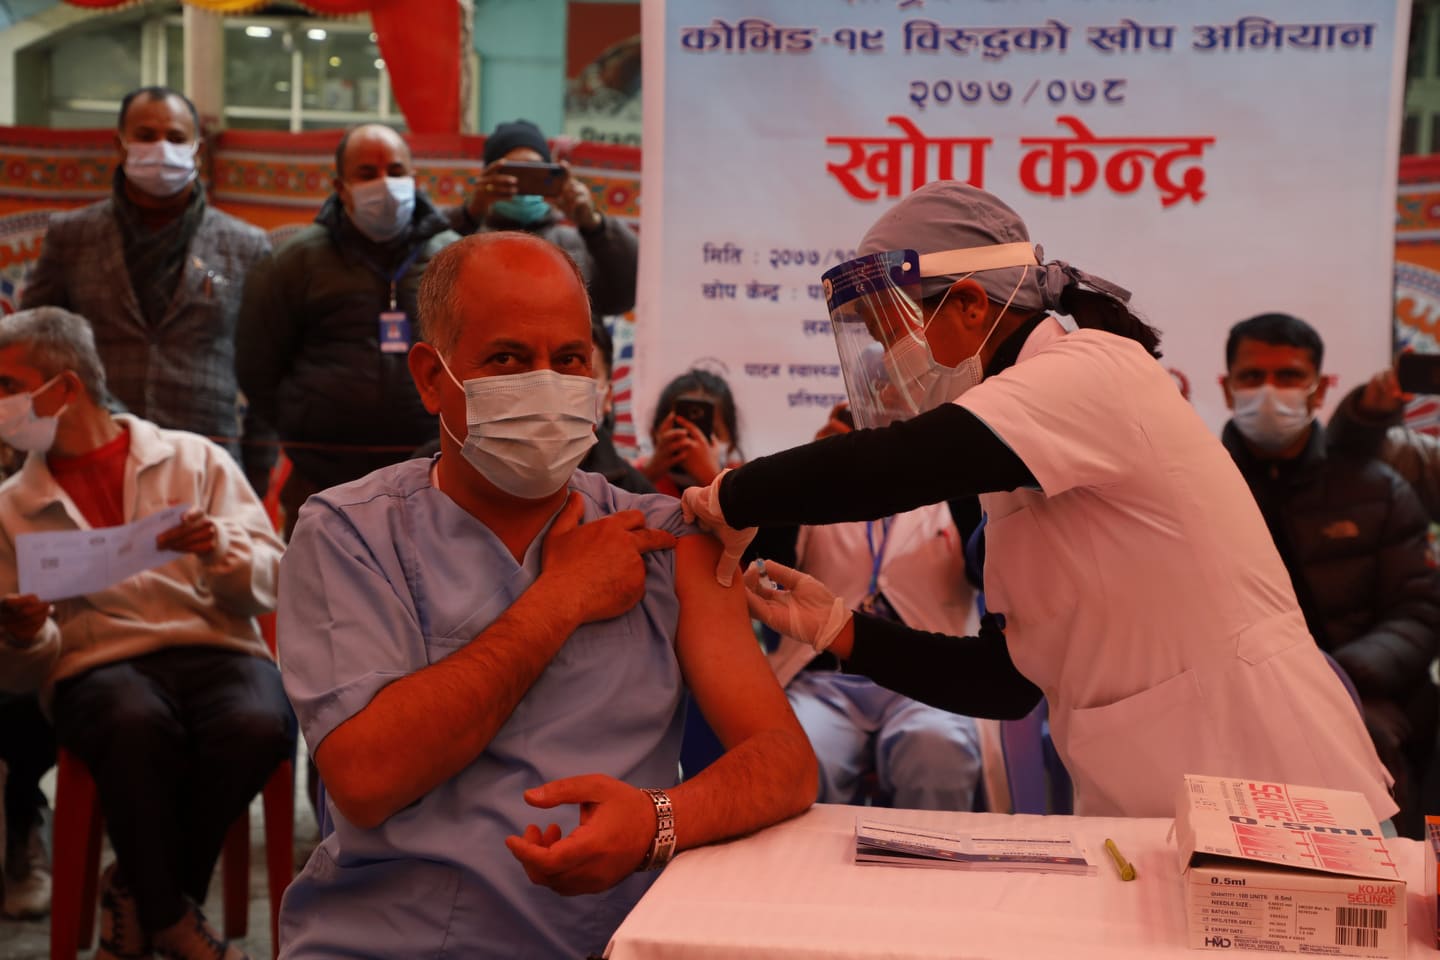 Nepal launches its Covid-19 vaccination drive starting with frontline and healthcare workers